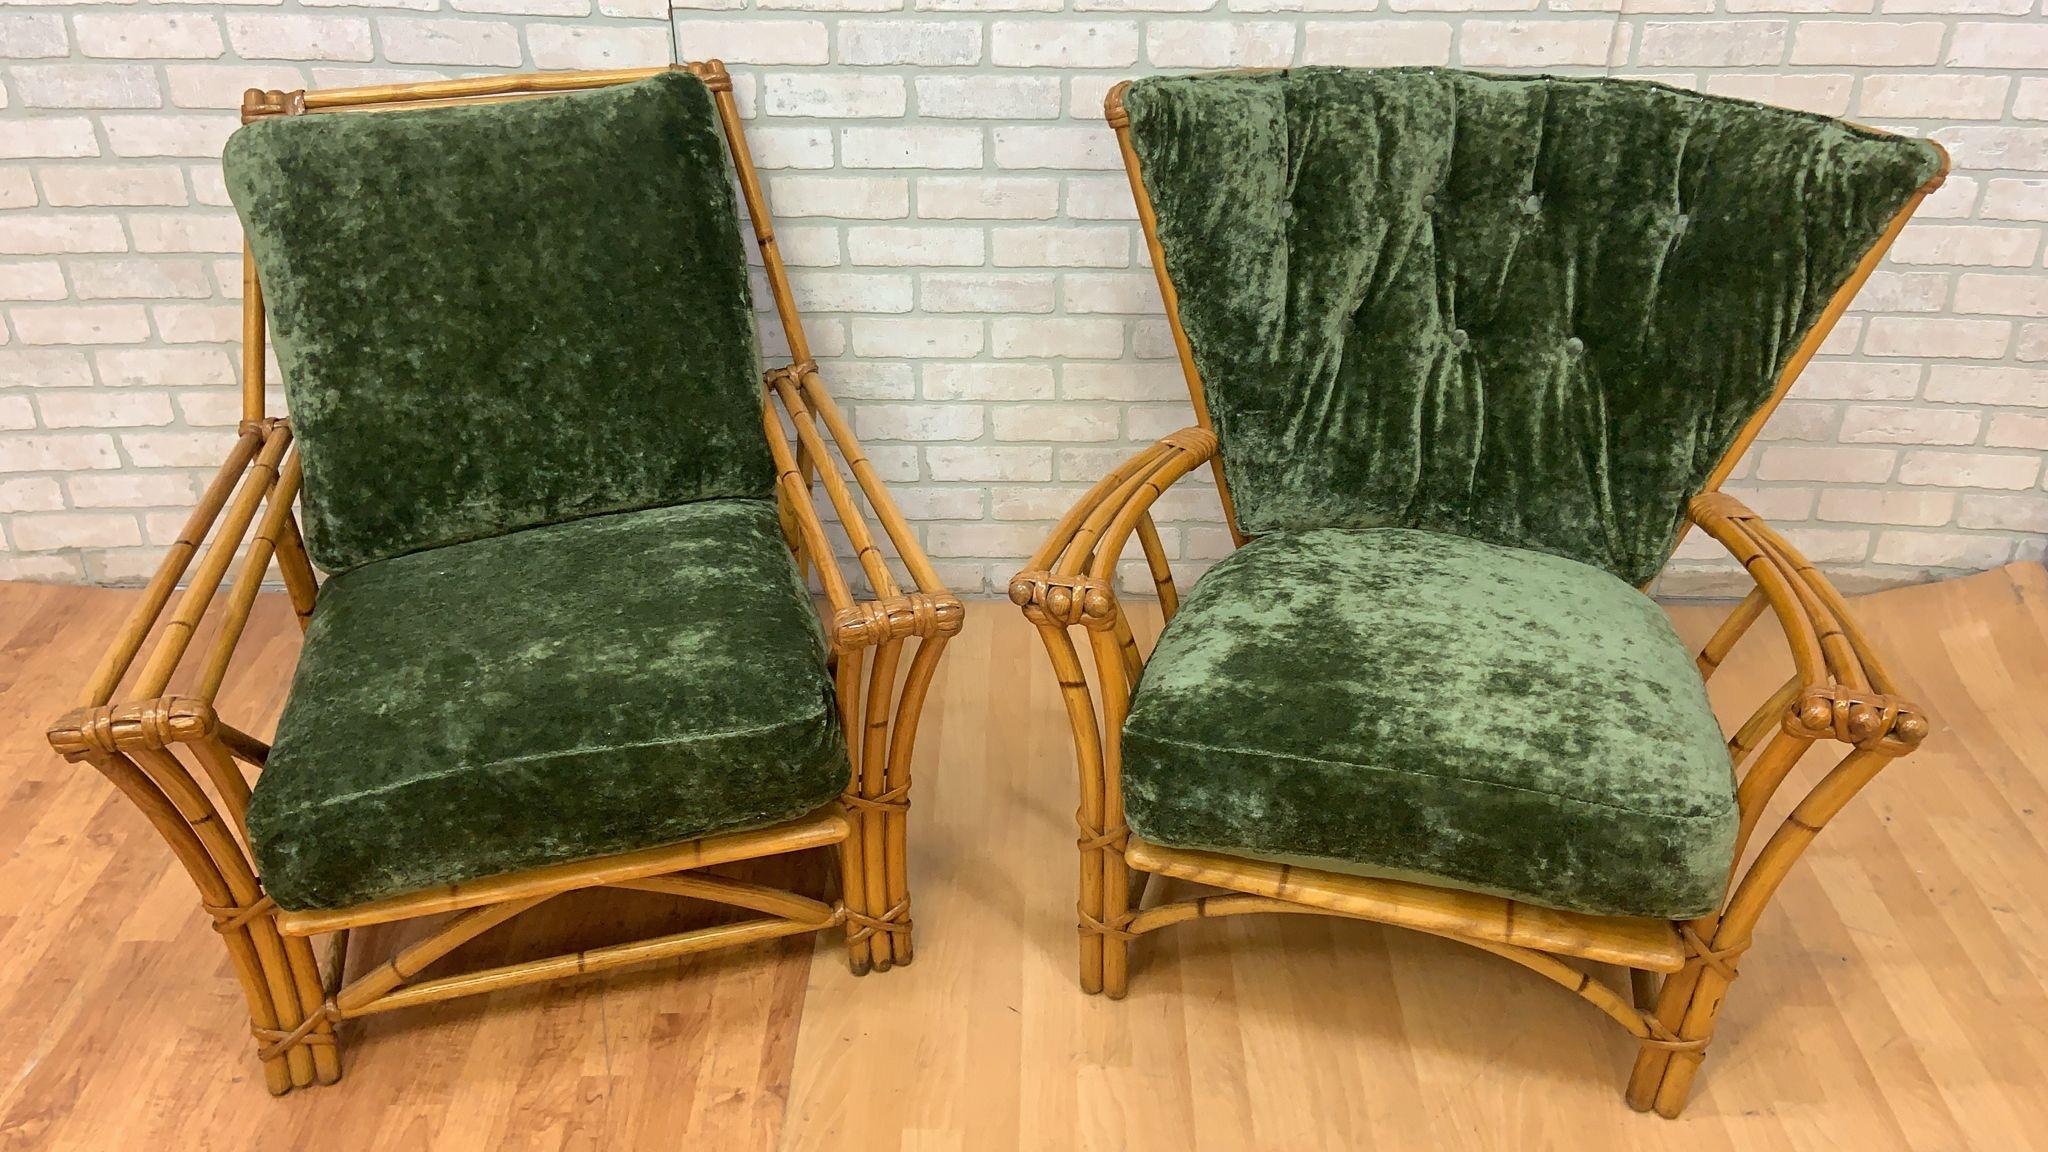 Hand-Crafted MCM Heywood Wakefield Ashcraft Rattan Lounge Chairs Newly Upholstered - Set of 2 For Sale